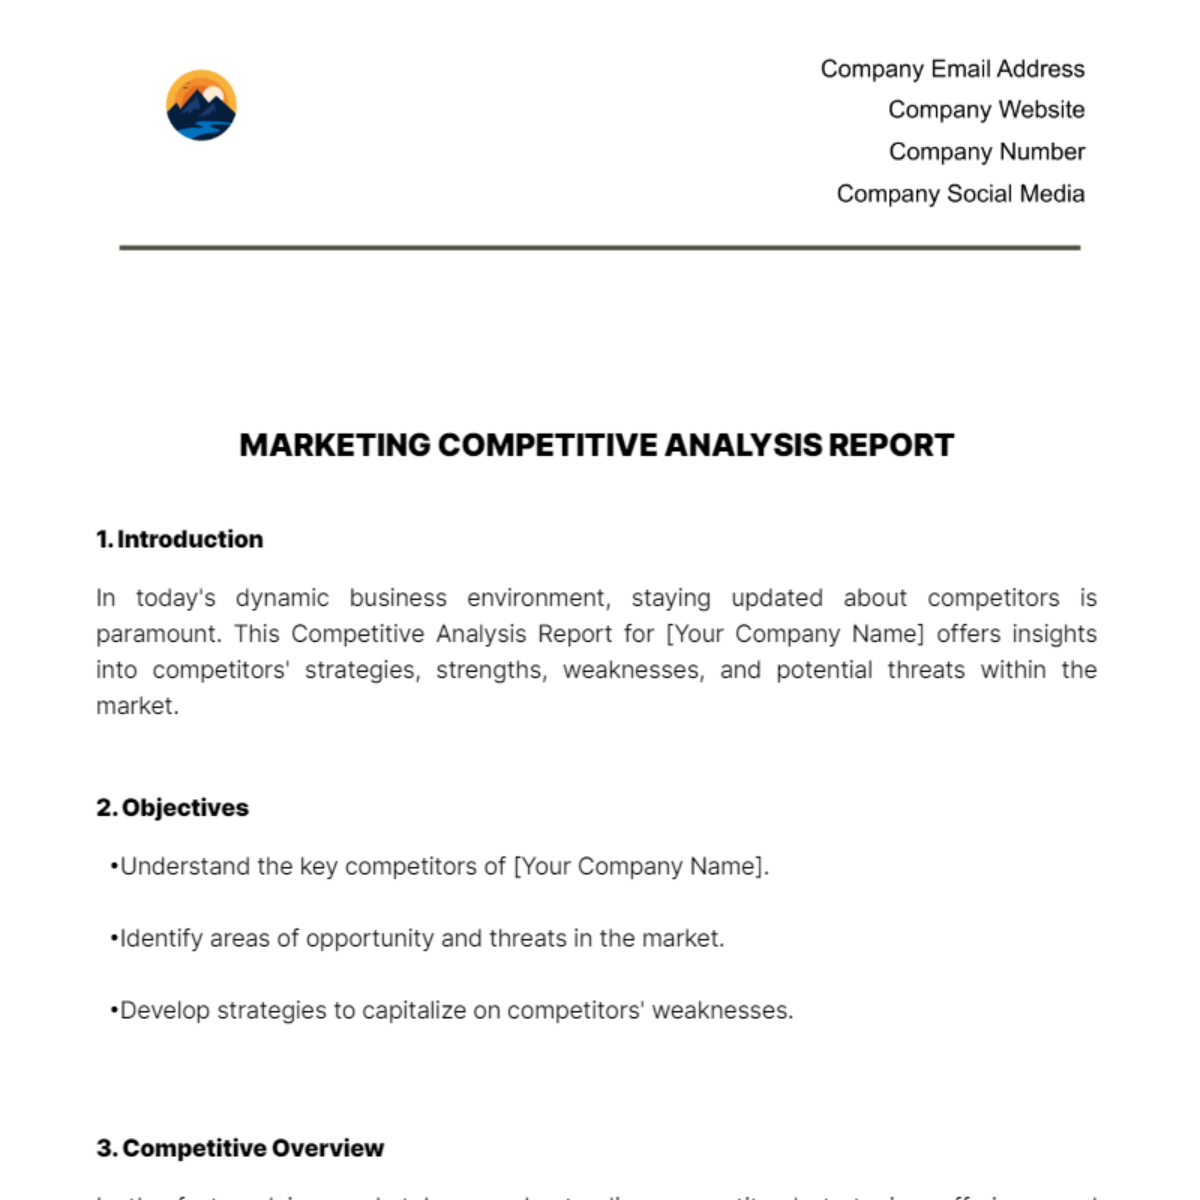 Marketing Competitive Analysis Report Template